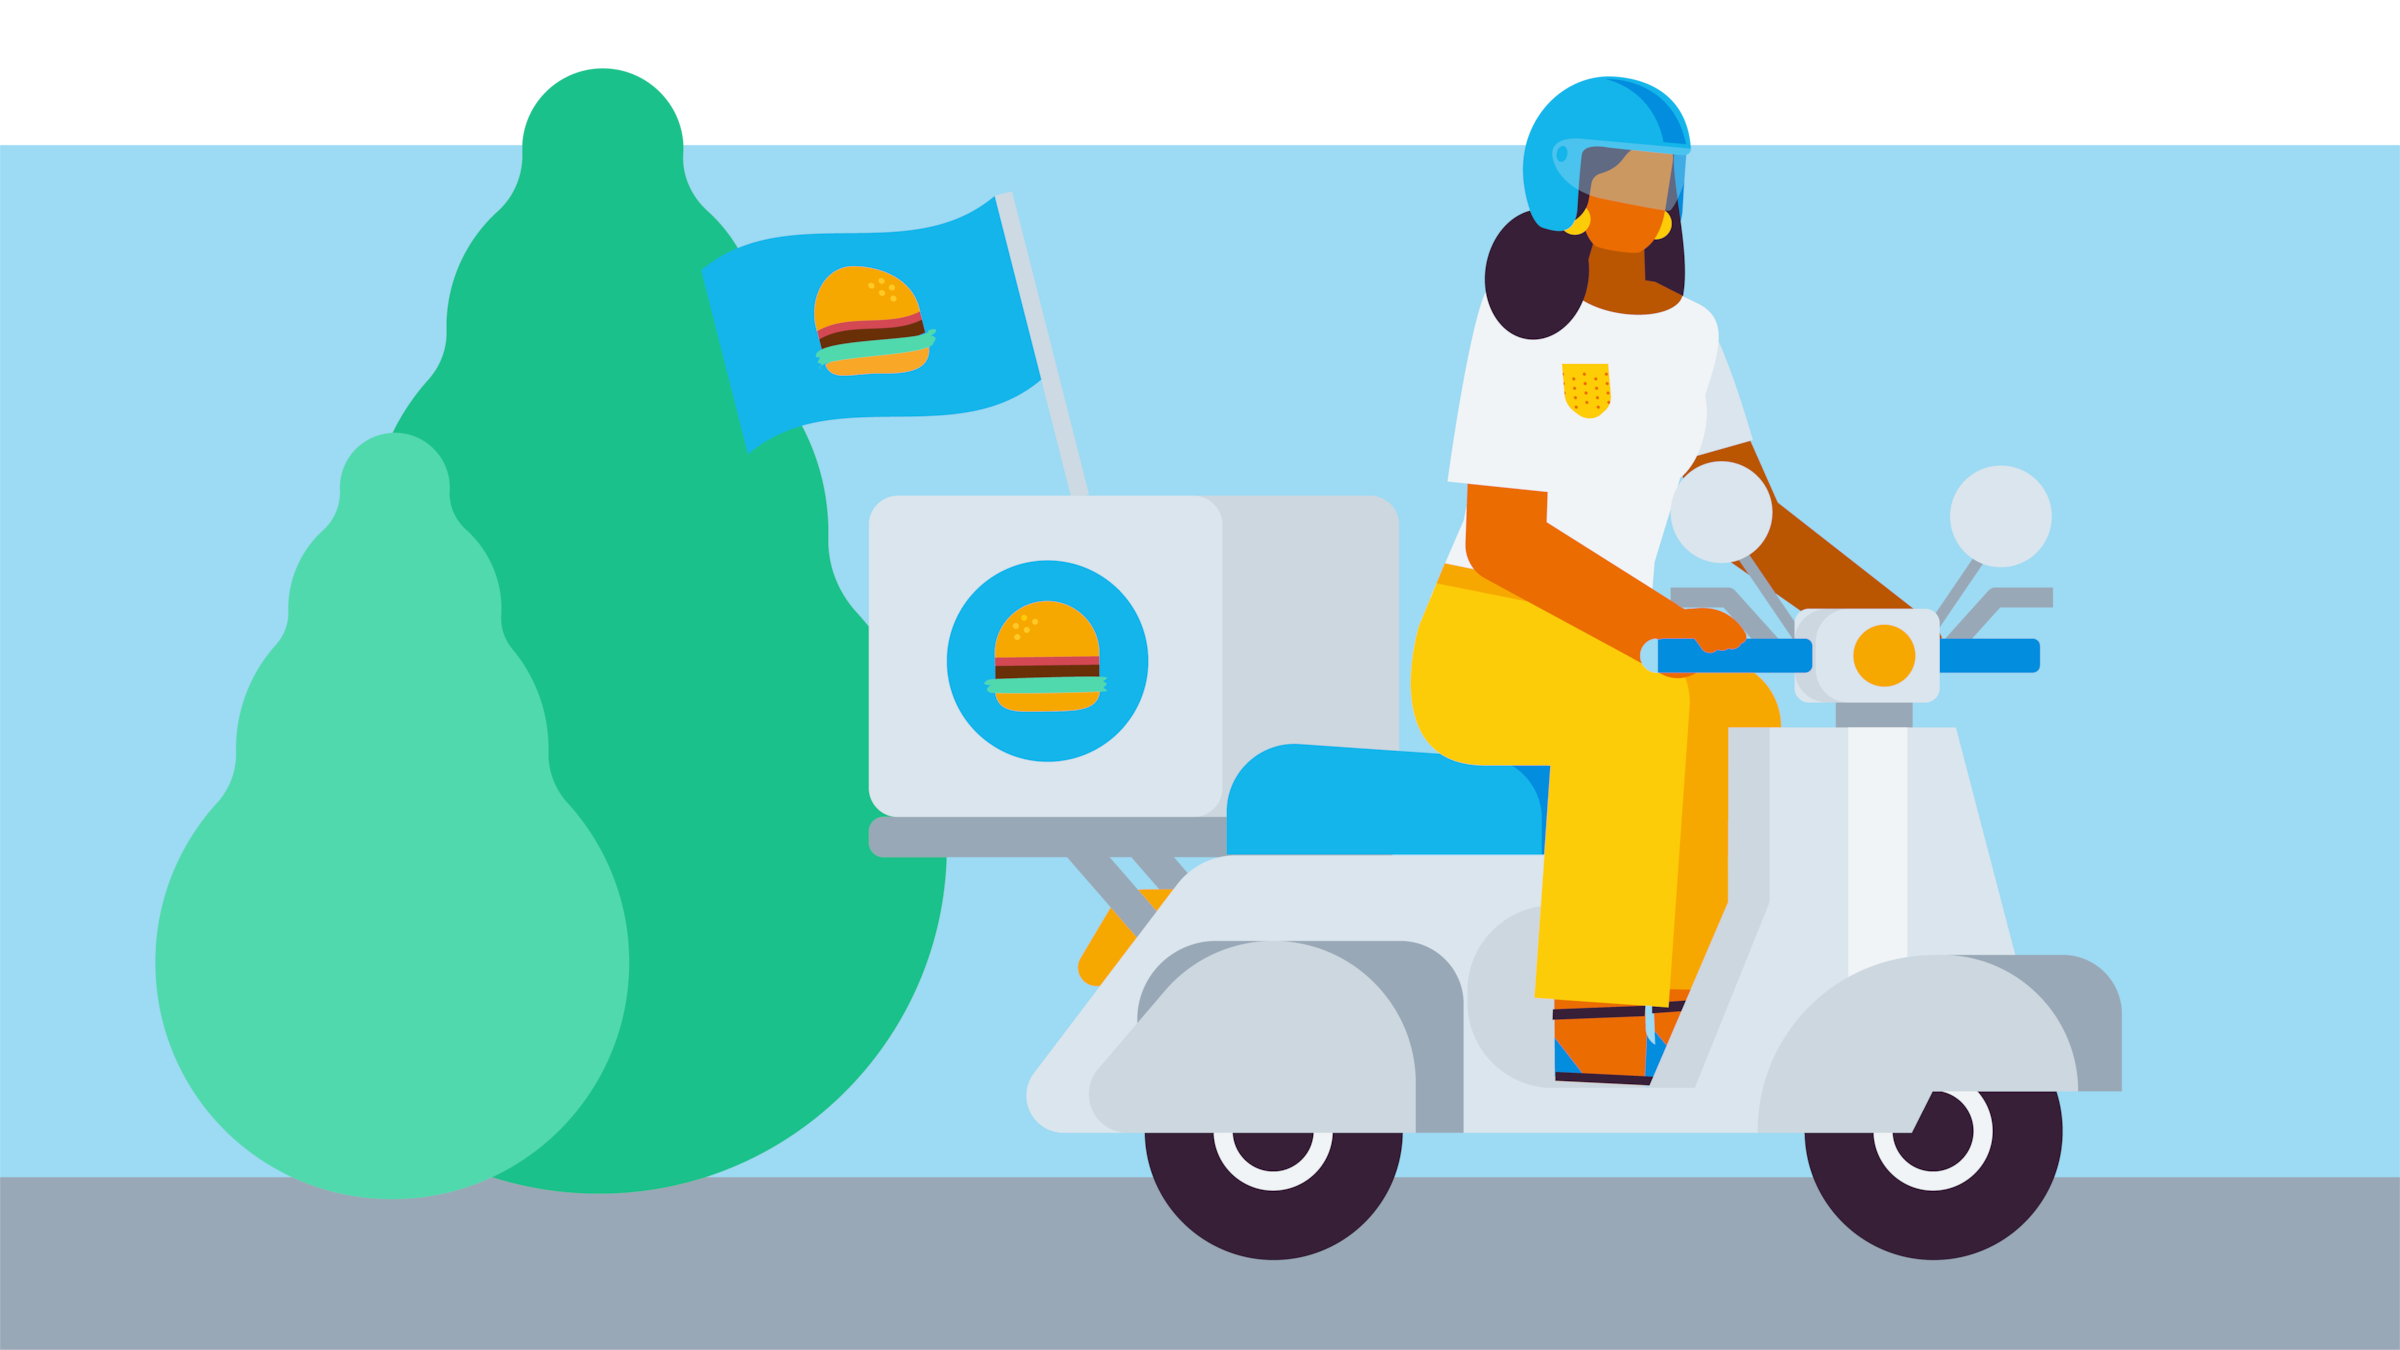 A person on a moped delivering burgers